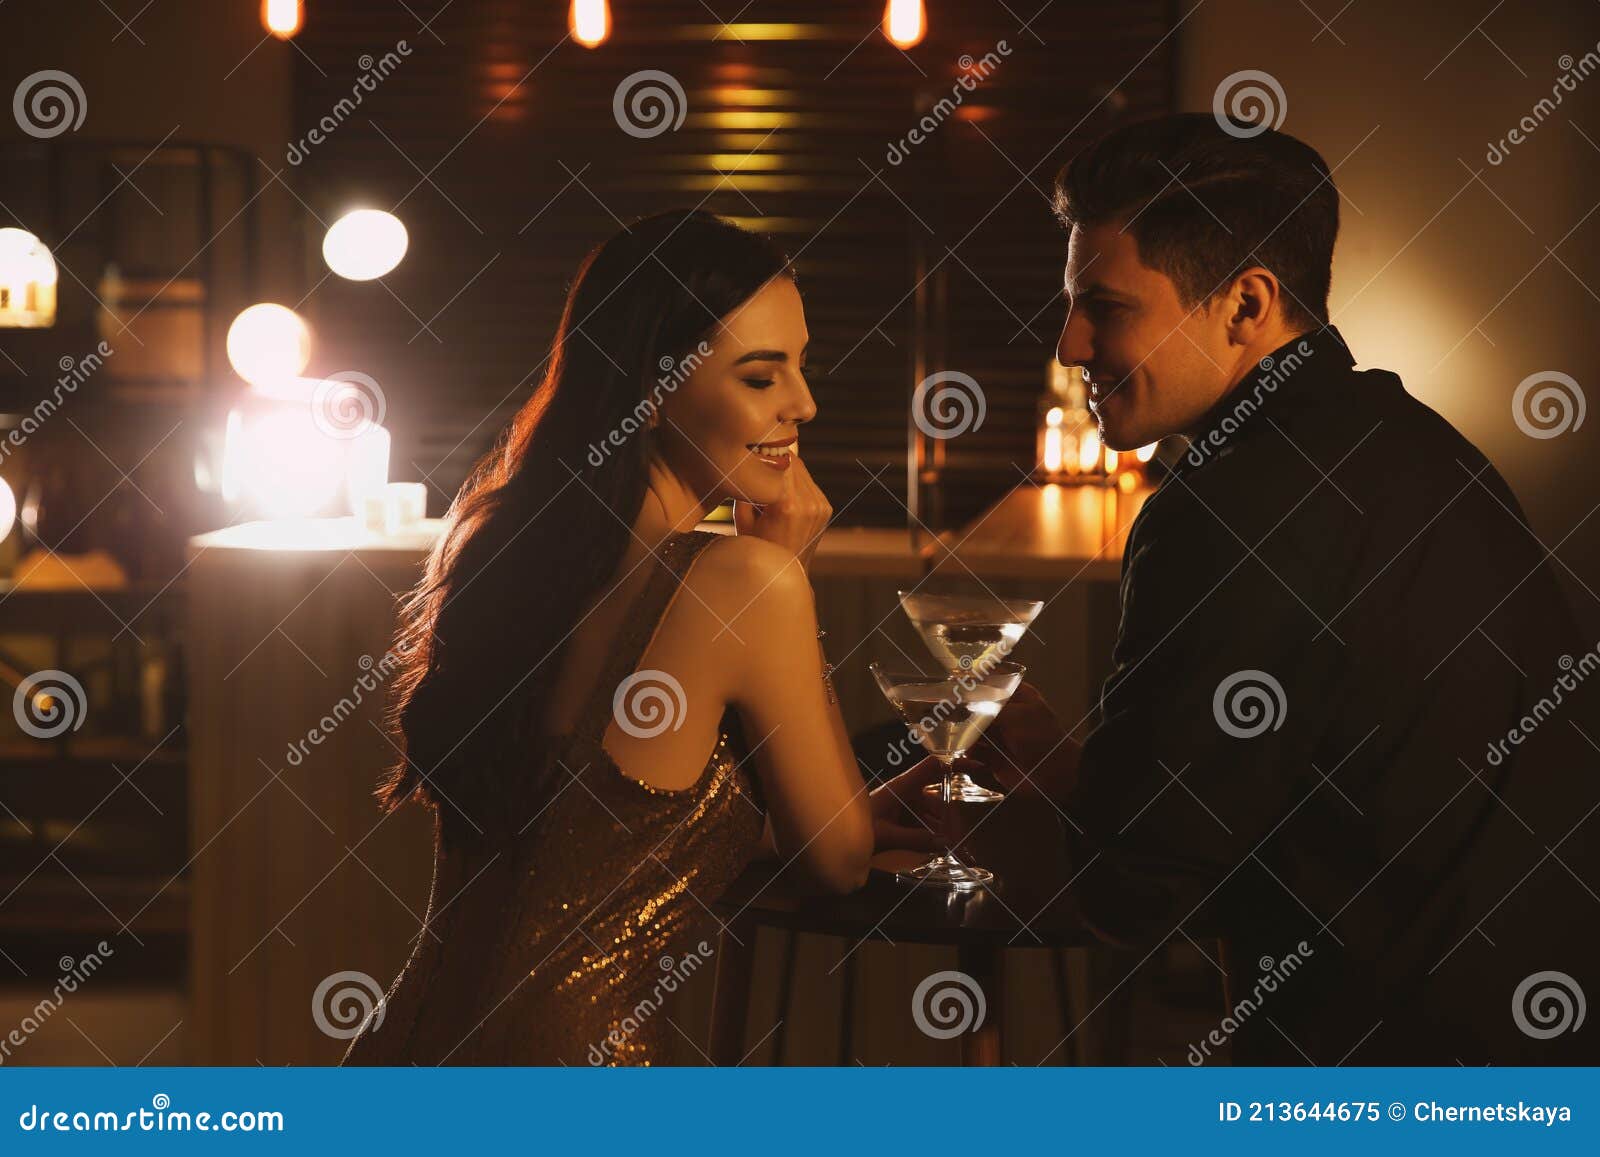 man and woman flirting with each other in bar